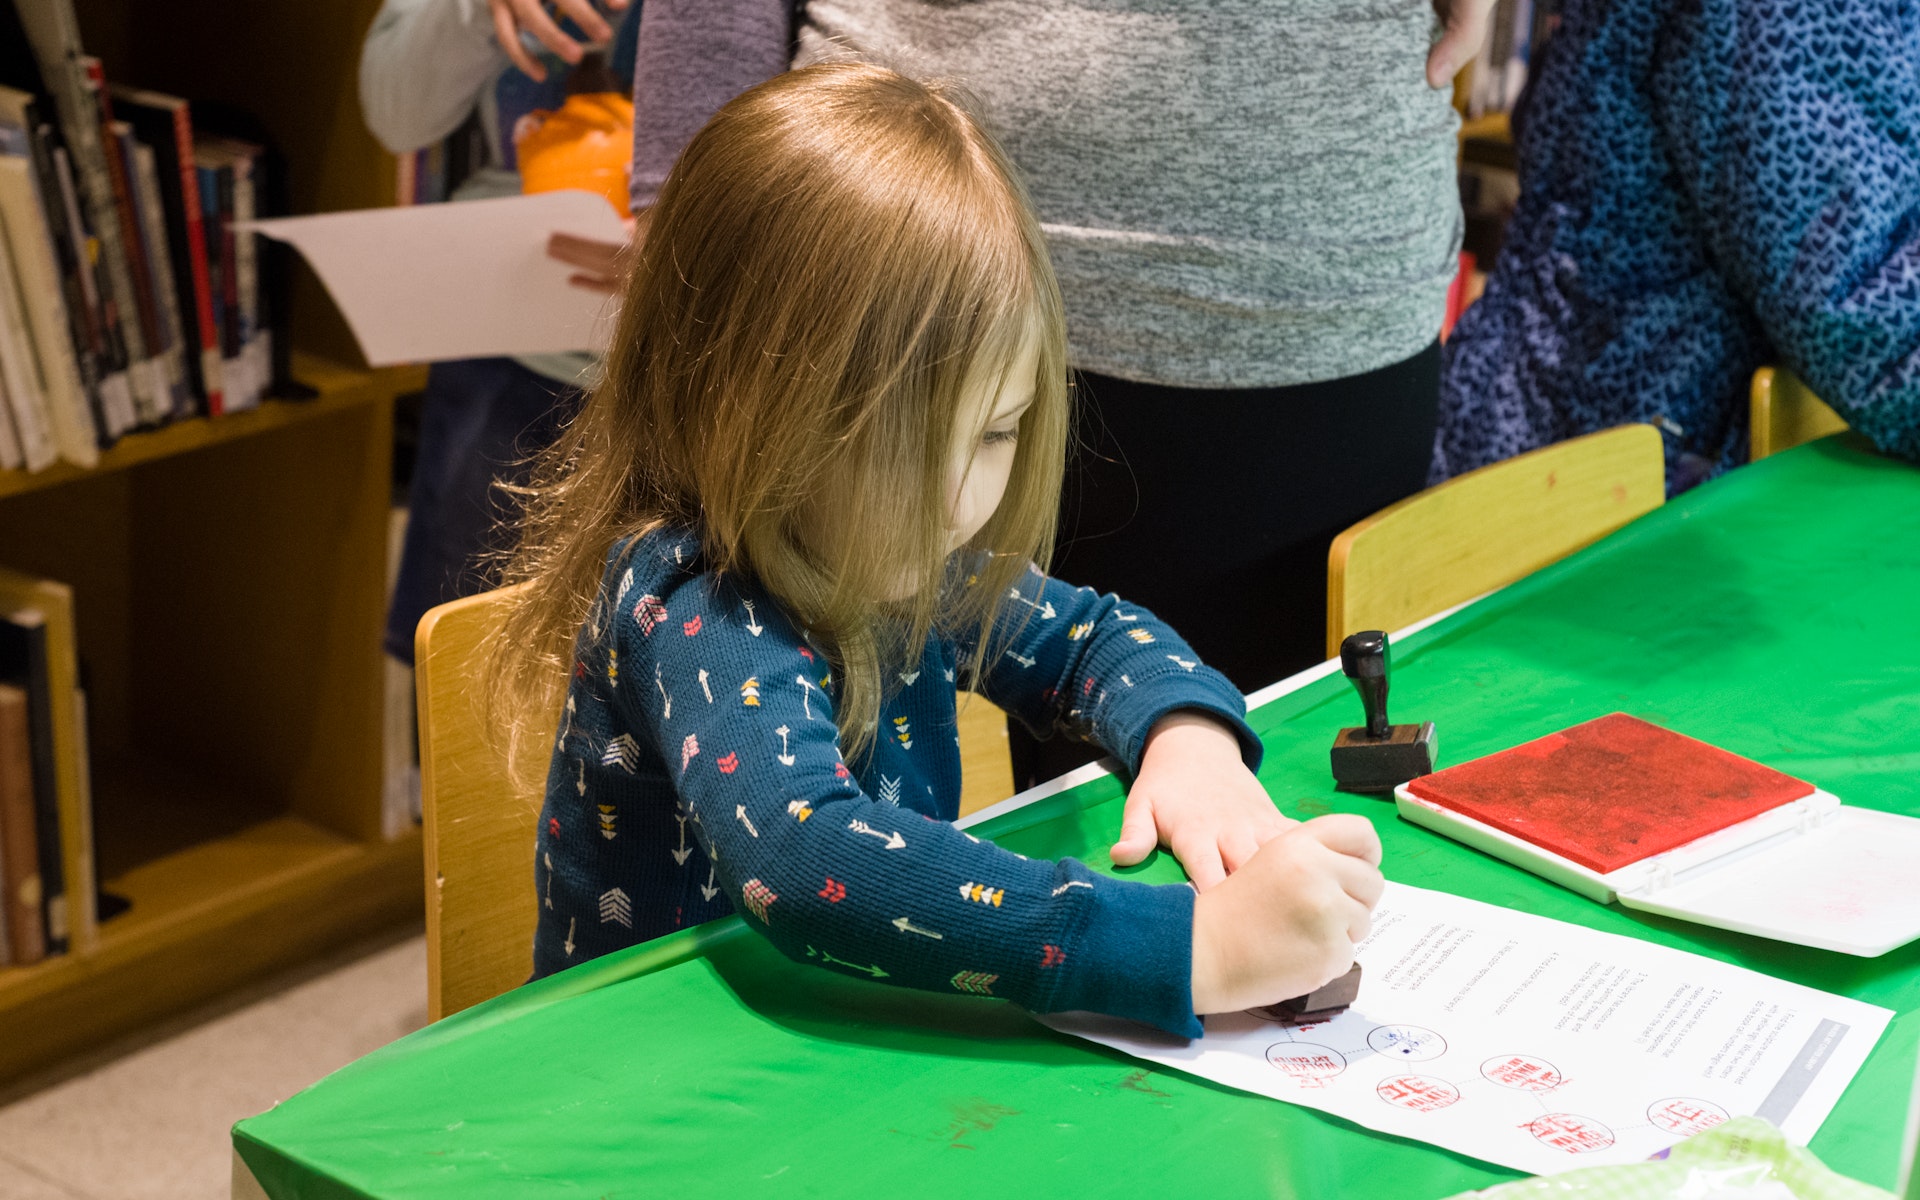 A young girl makes a book at a table using a rubber stamp.